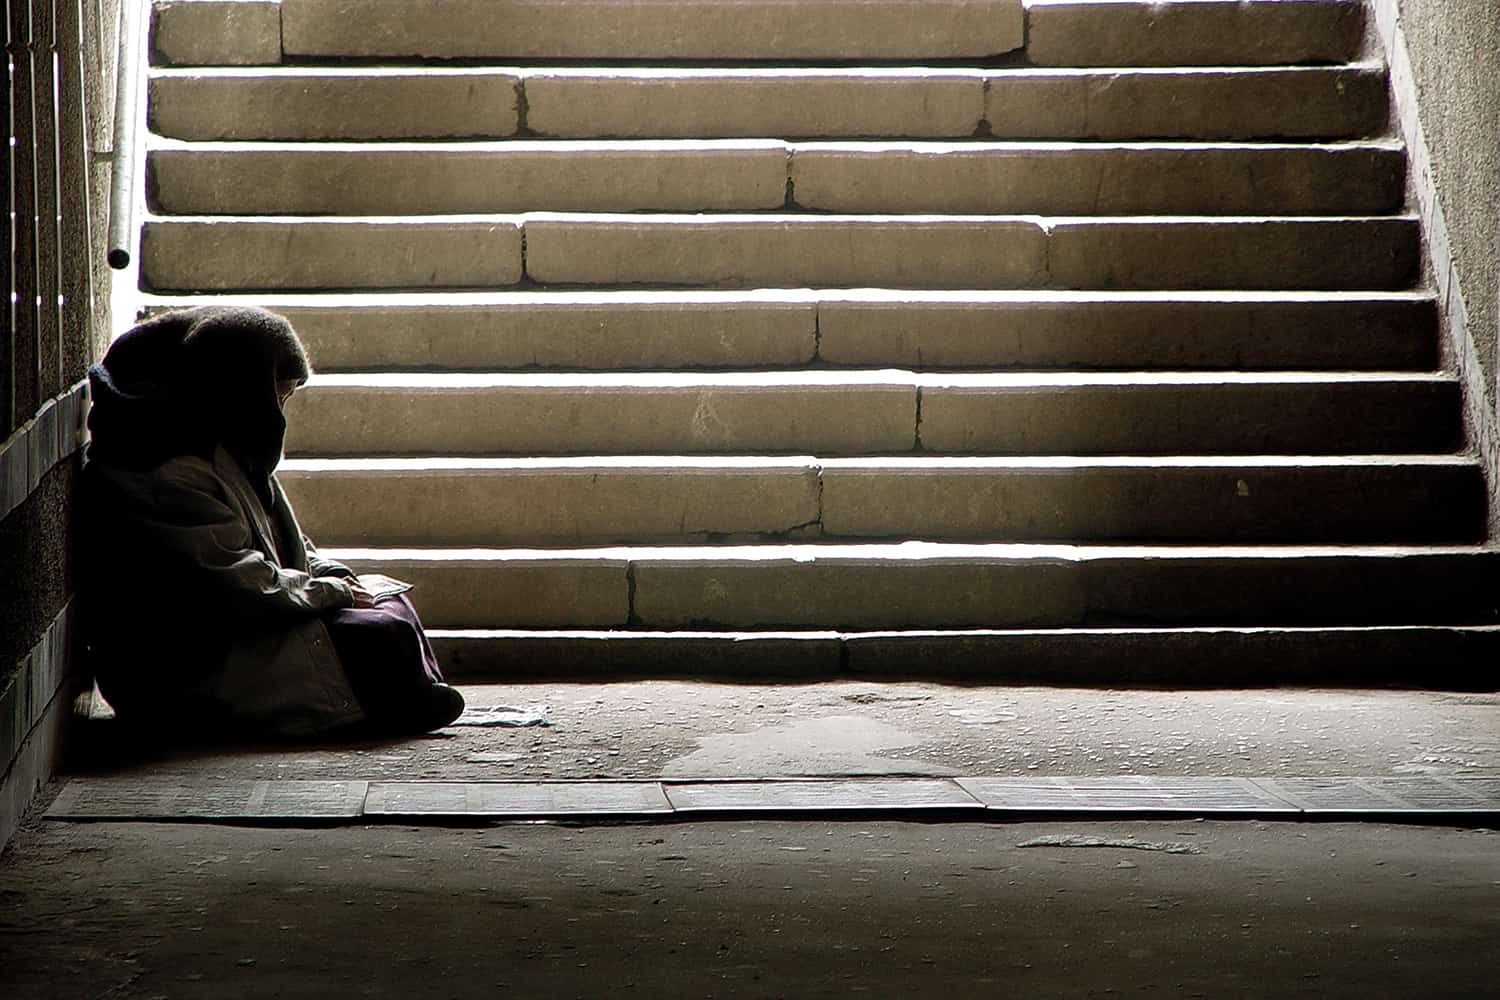 A homeless person sat below a set of stairs.